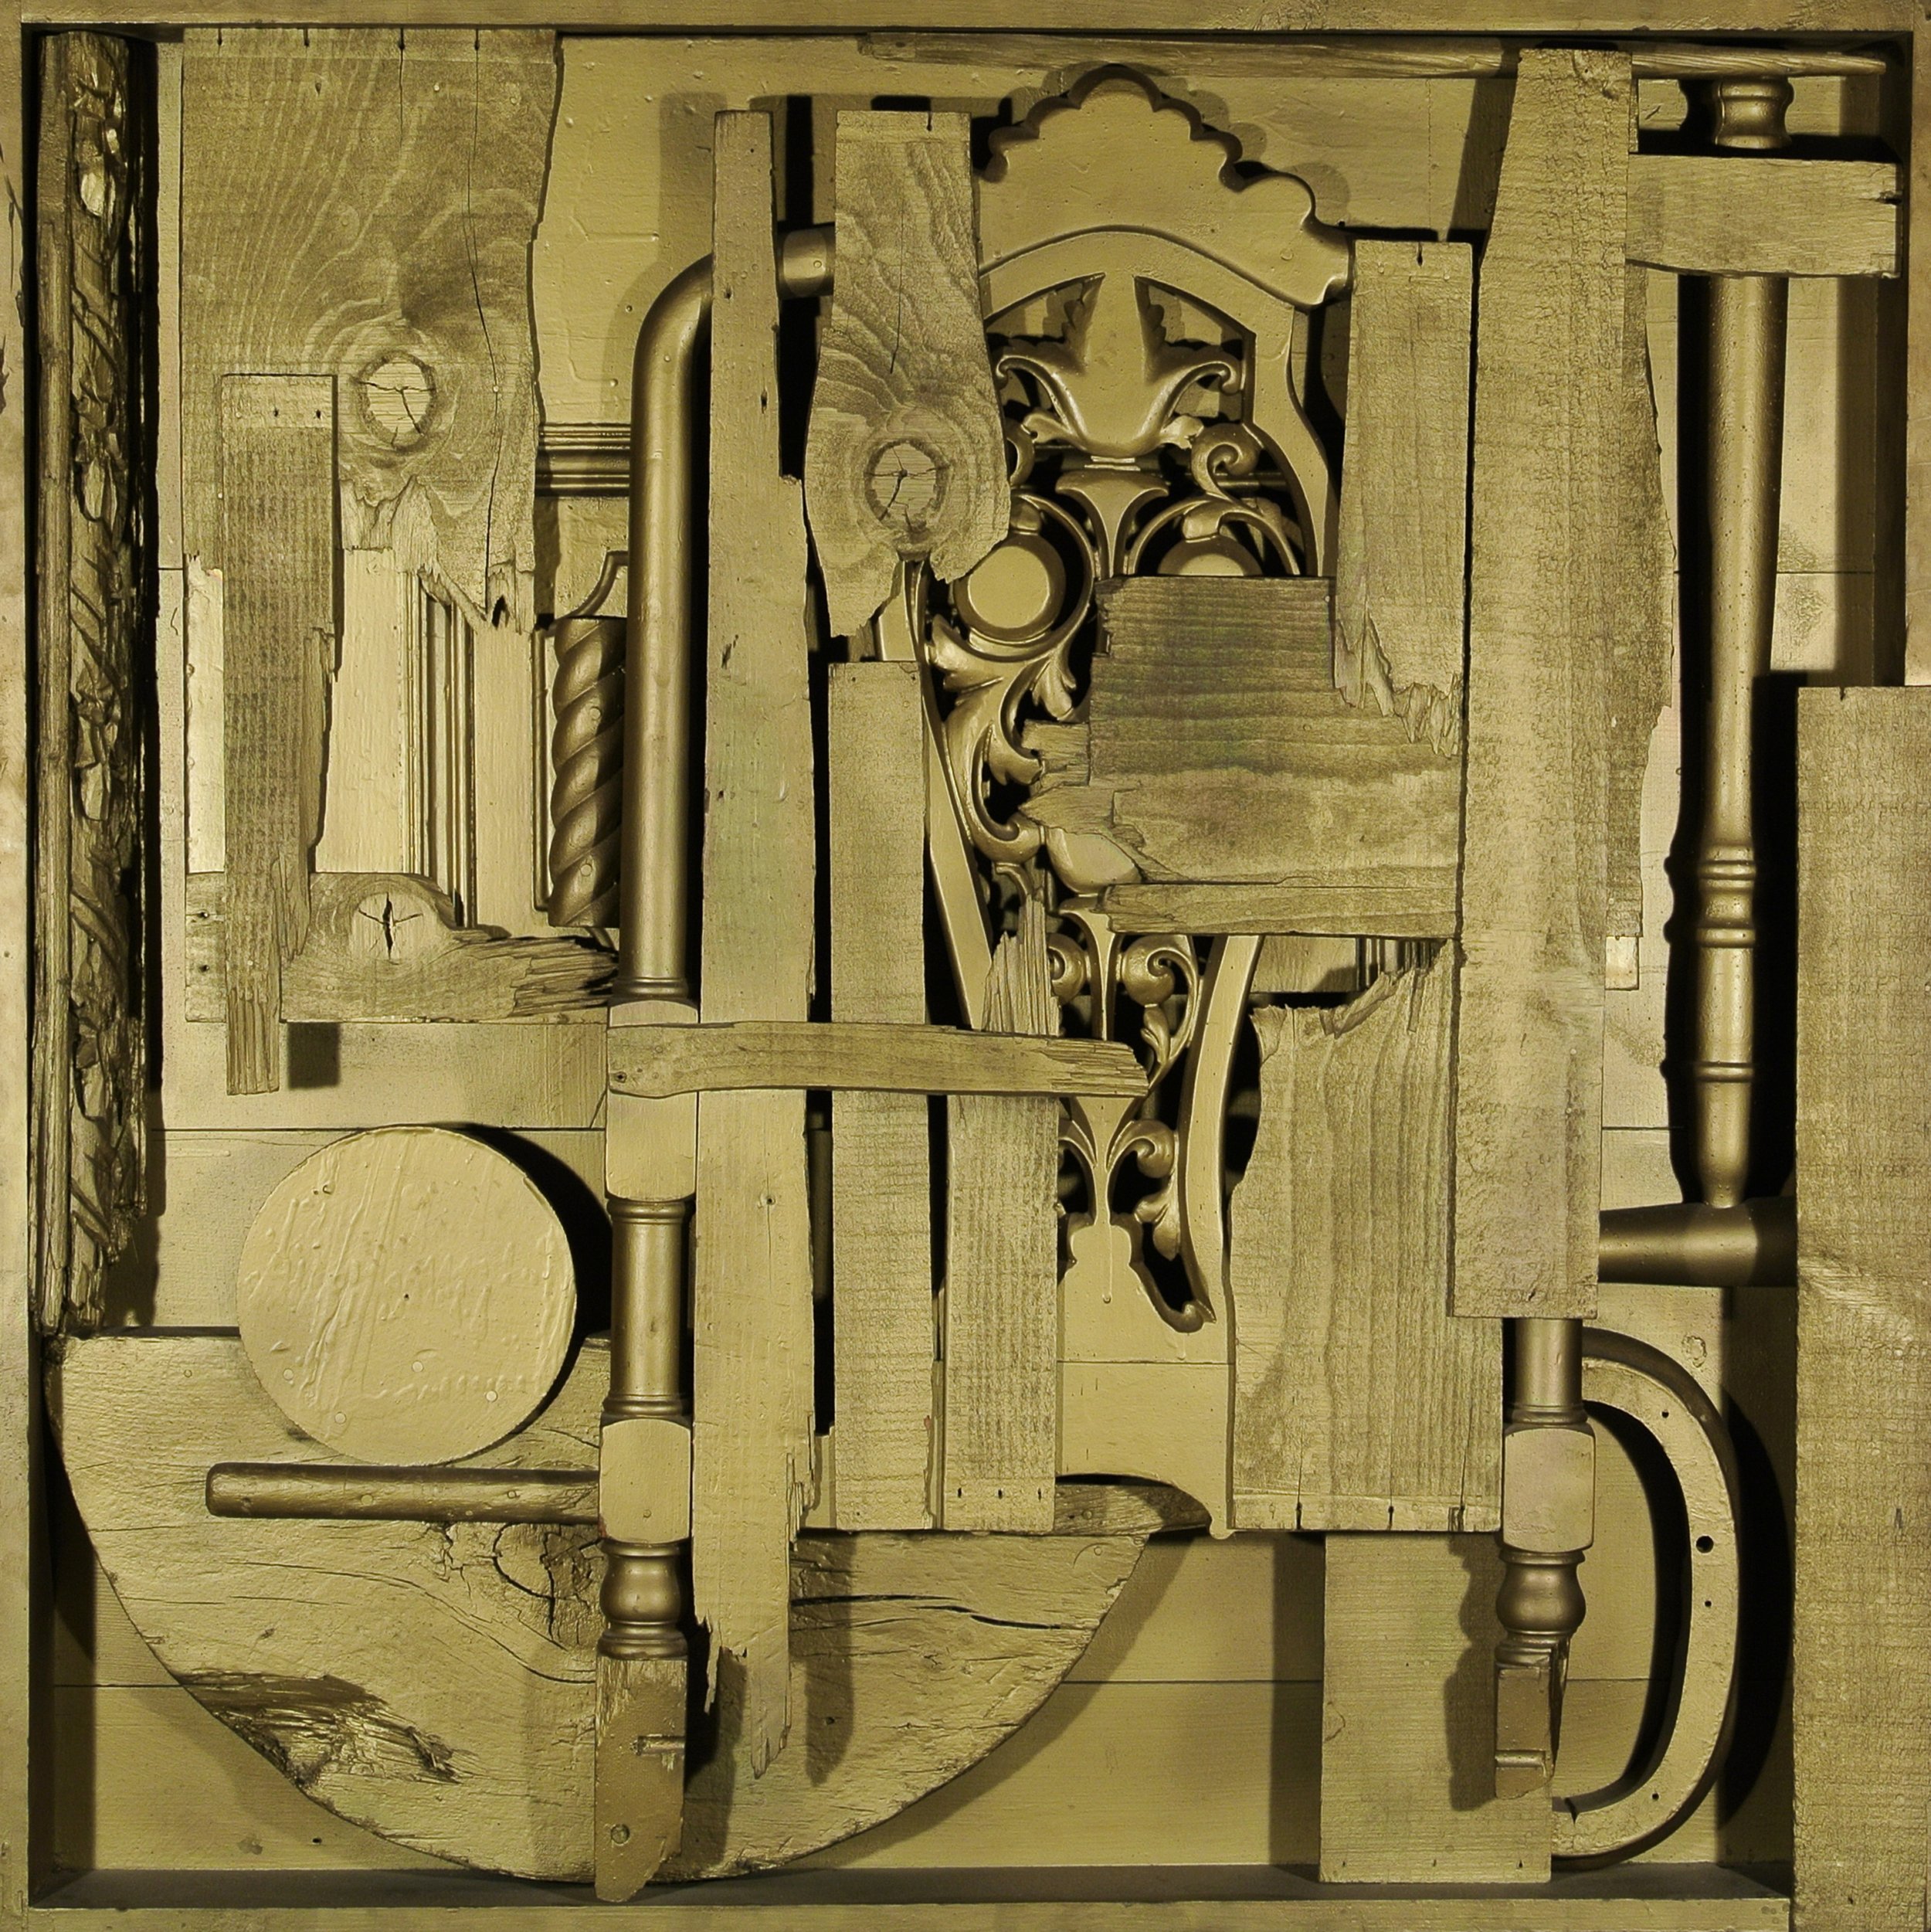   LOUSIE NEVELSON ,   (American, 1899-1988),  Golden Odyssey , 1961, Painted wood, 39 ½ x 39 ½ x 4 ¾ inches, Bequest of Vera Beth Hicks 